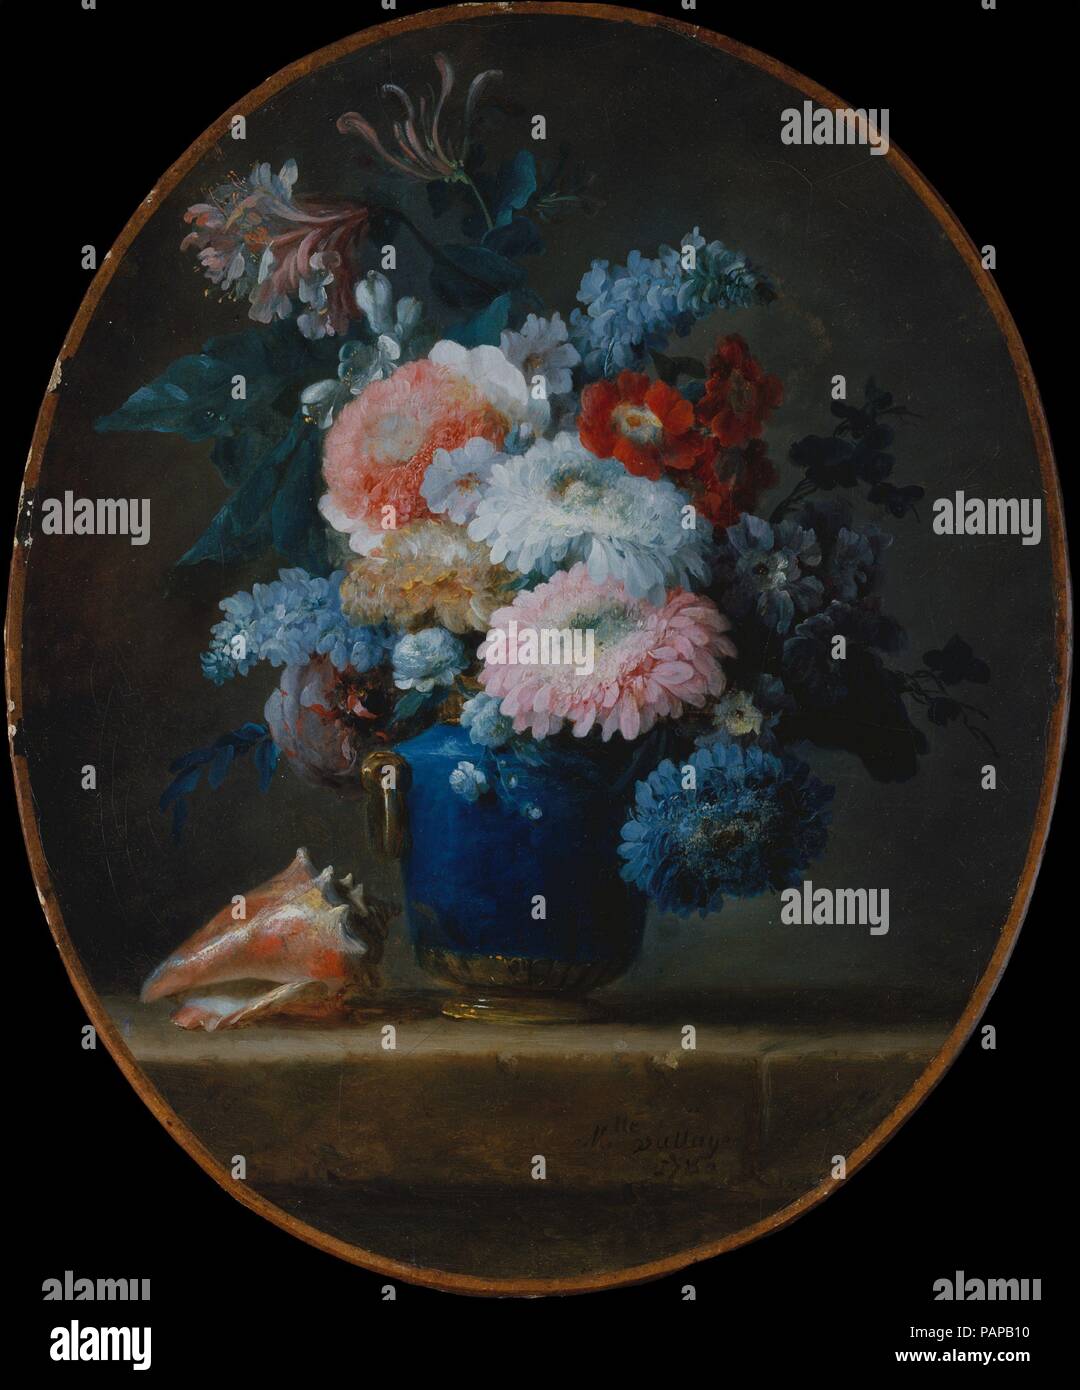 Vase of Flowers and Conch Shell. Artist: Anne Vallayer-Coster (French, Paris 1744-1818 Paris). Dimensions: Oval, 19 3/4 x 15 in. (50.2 x 38.1 cm). Date: 1780.  A leading exponent of still life painting, Vallayer-Coster joined the French Academy in 1770. She was patronized before the revolution by Marie Antoinette and later by the Empress Josephine.  This picture can perhaps be identified with one of 'three small oval paintings of flowers and fruits' exhibited in the Salon of 1781. Diderot commented upon the truthfulness of her work. Notice the play of light on the porcelain and gilt of the vas Stock Photo